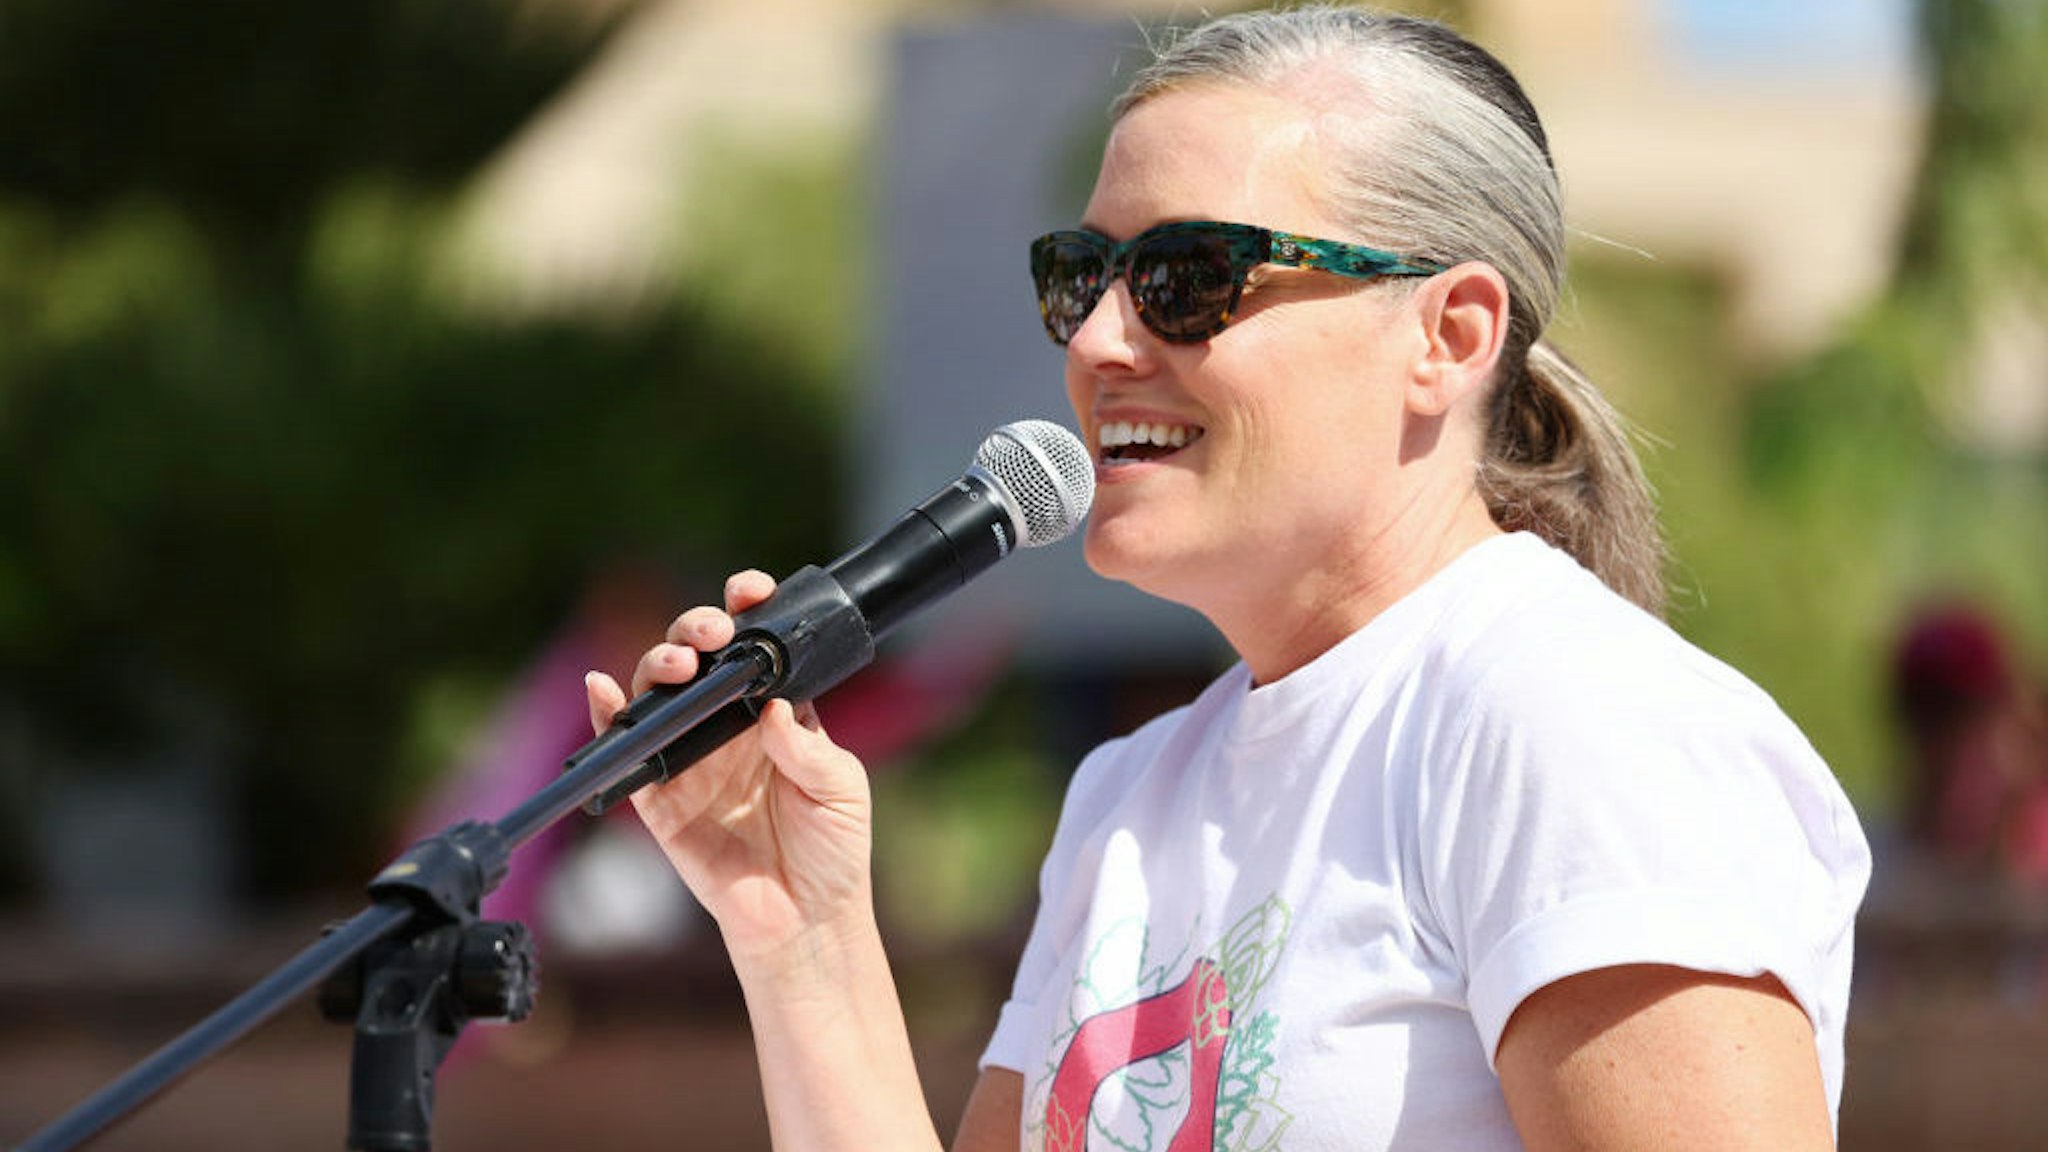 PHOENIX, ARIZONA - OCTOBER 08: Arizona Secretary of State and Democratic gubernatorial candidate Katie Hobbs speaks at a Women's March rally in support of midterm election candidates who support abortion rights outside the State Capitol on October 8, 2022 in Phoenix, Arizona. Hobbs faces Trump-endorsed Arizona Republican nominee for governor Kari Lake in the midterm elections on November 8. (Photo by Mario Tama/Getty Images)